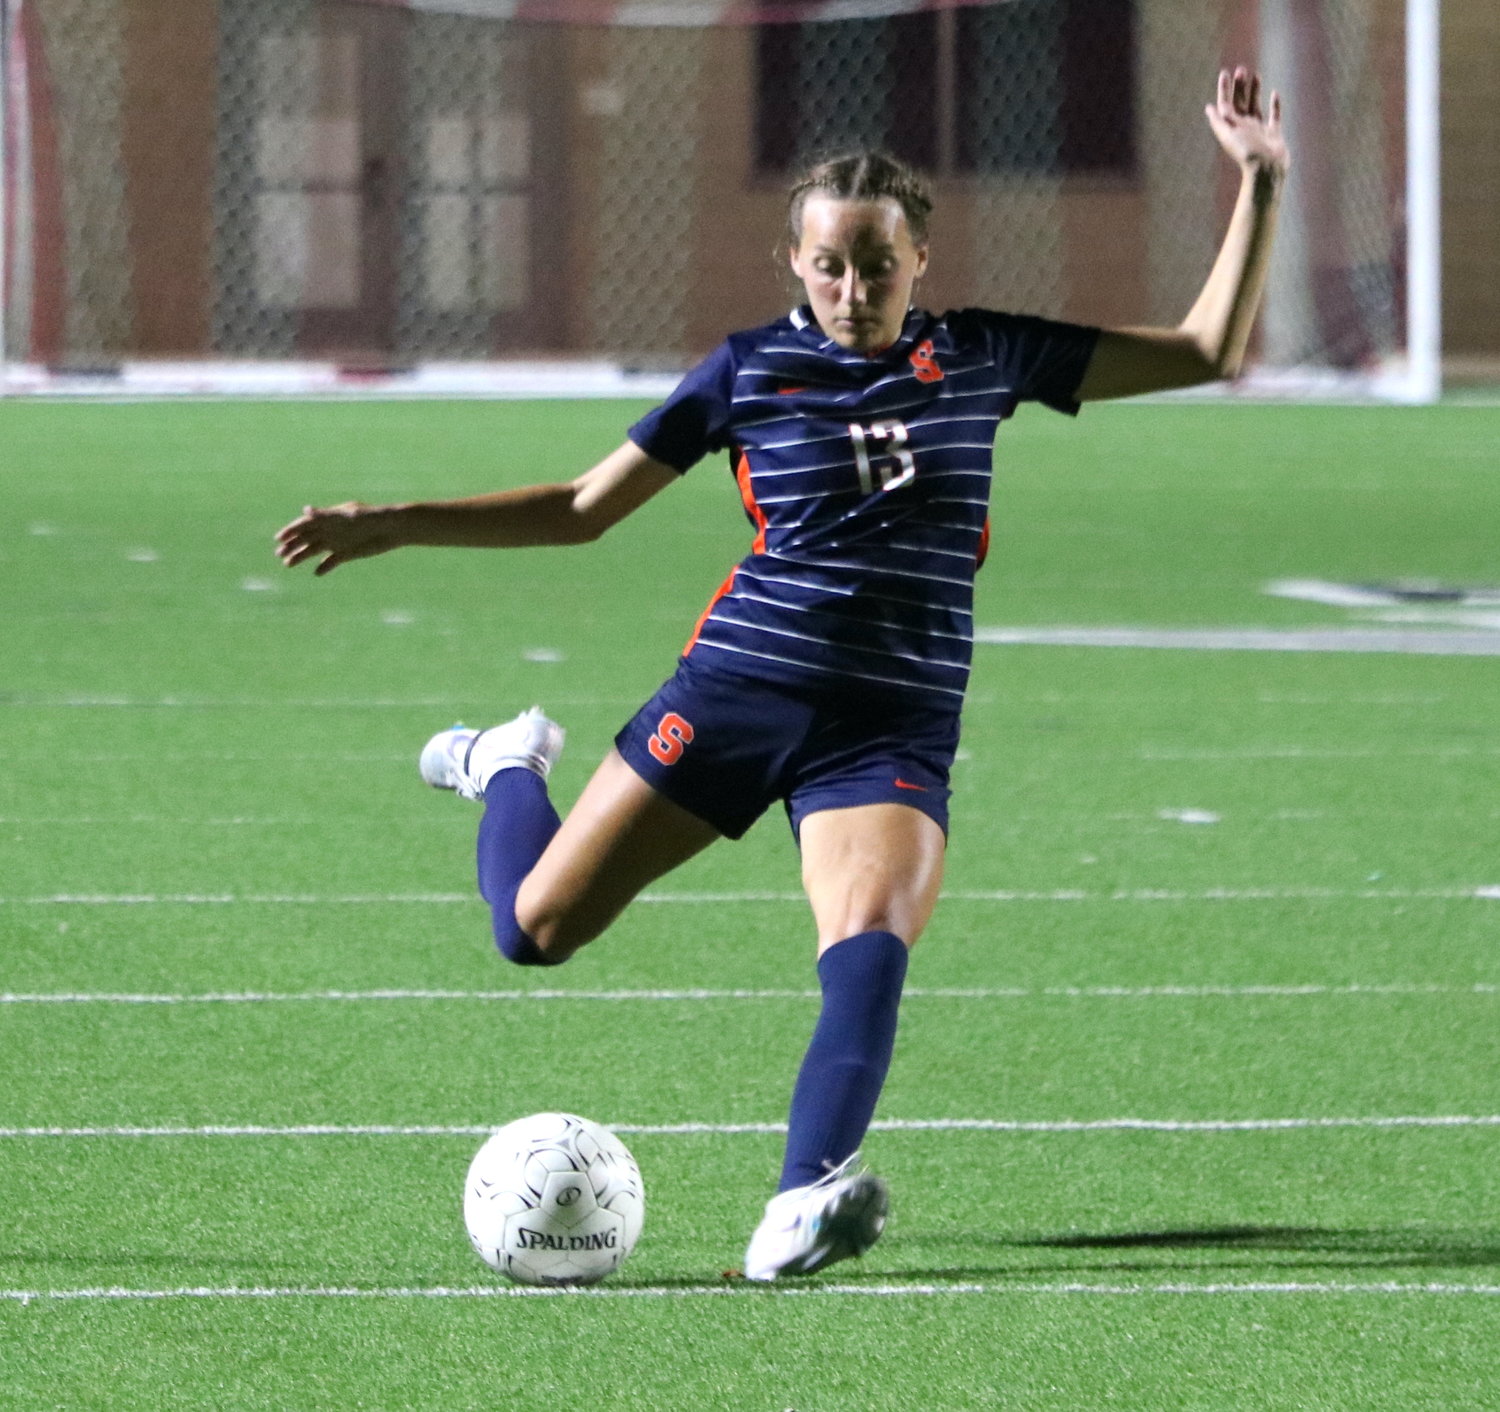 Ally Townsend takes a free kick during Friday's bi-district game between Seven Lakes and George Ranch at Legacy Stadium.